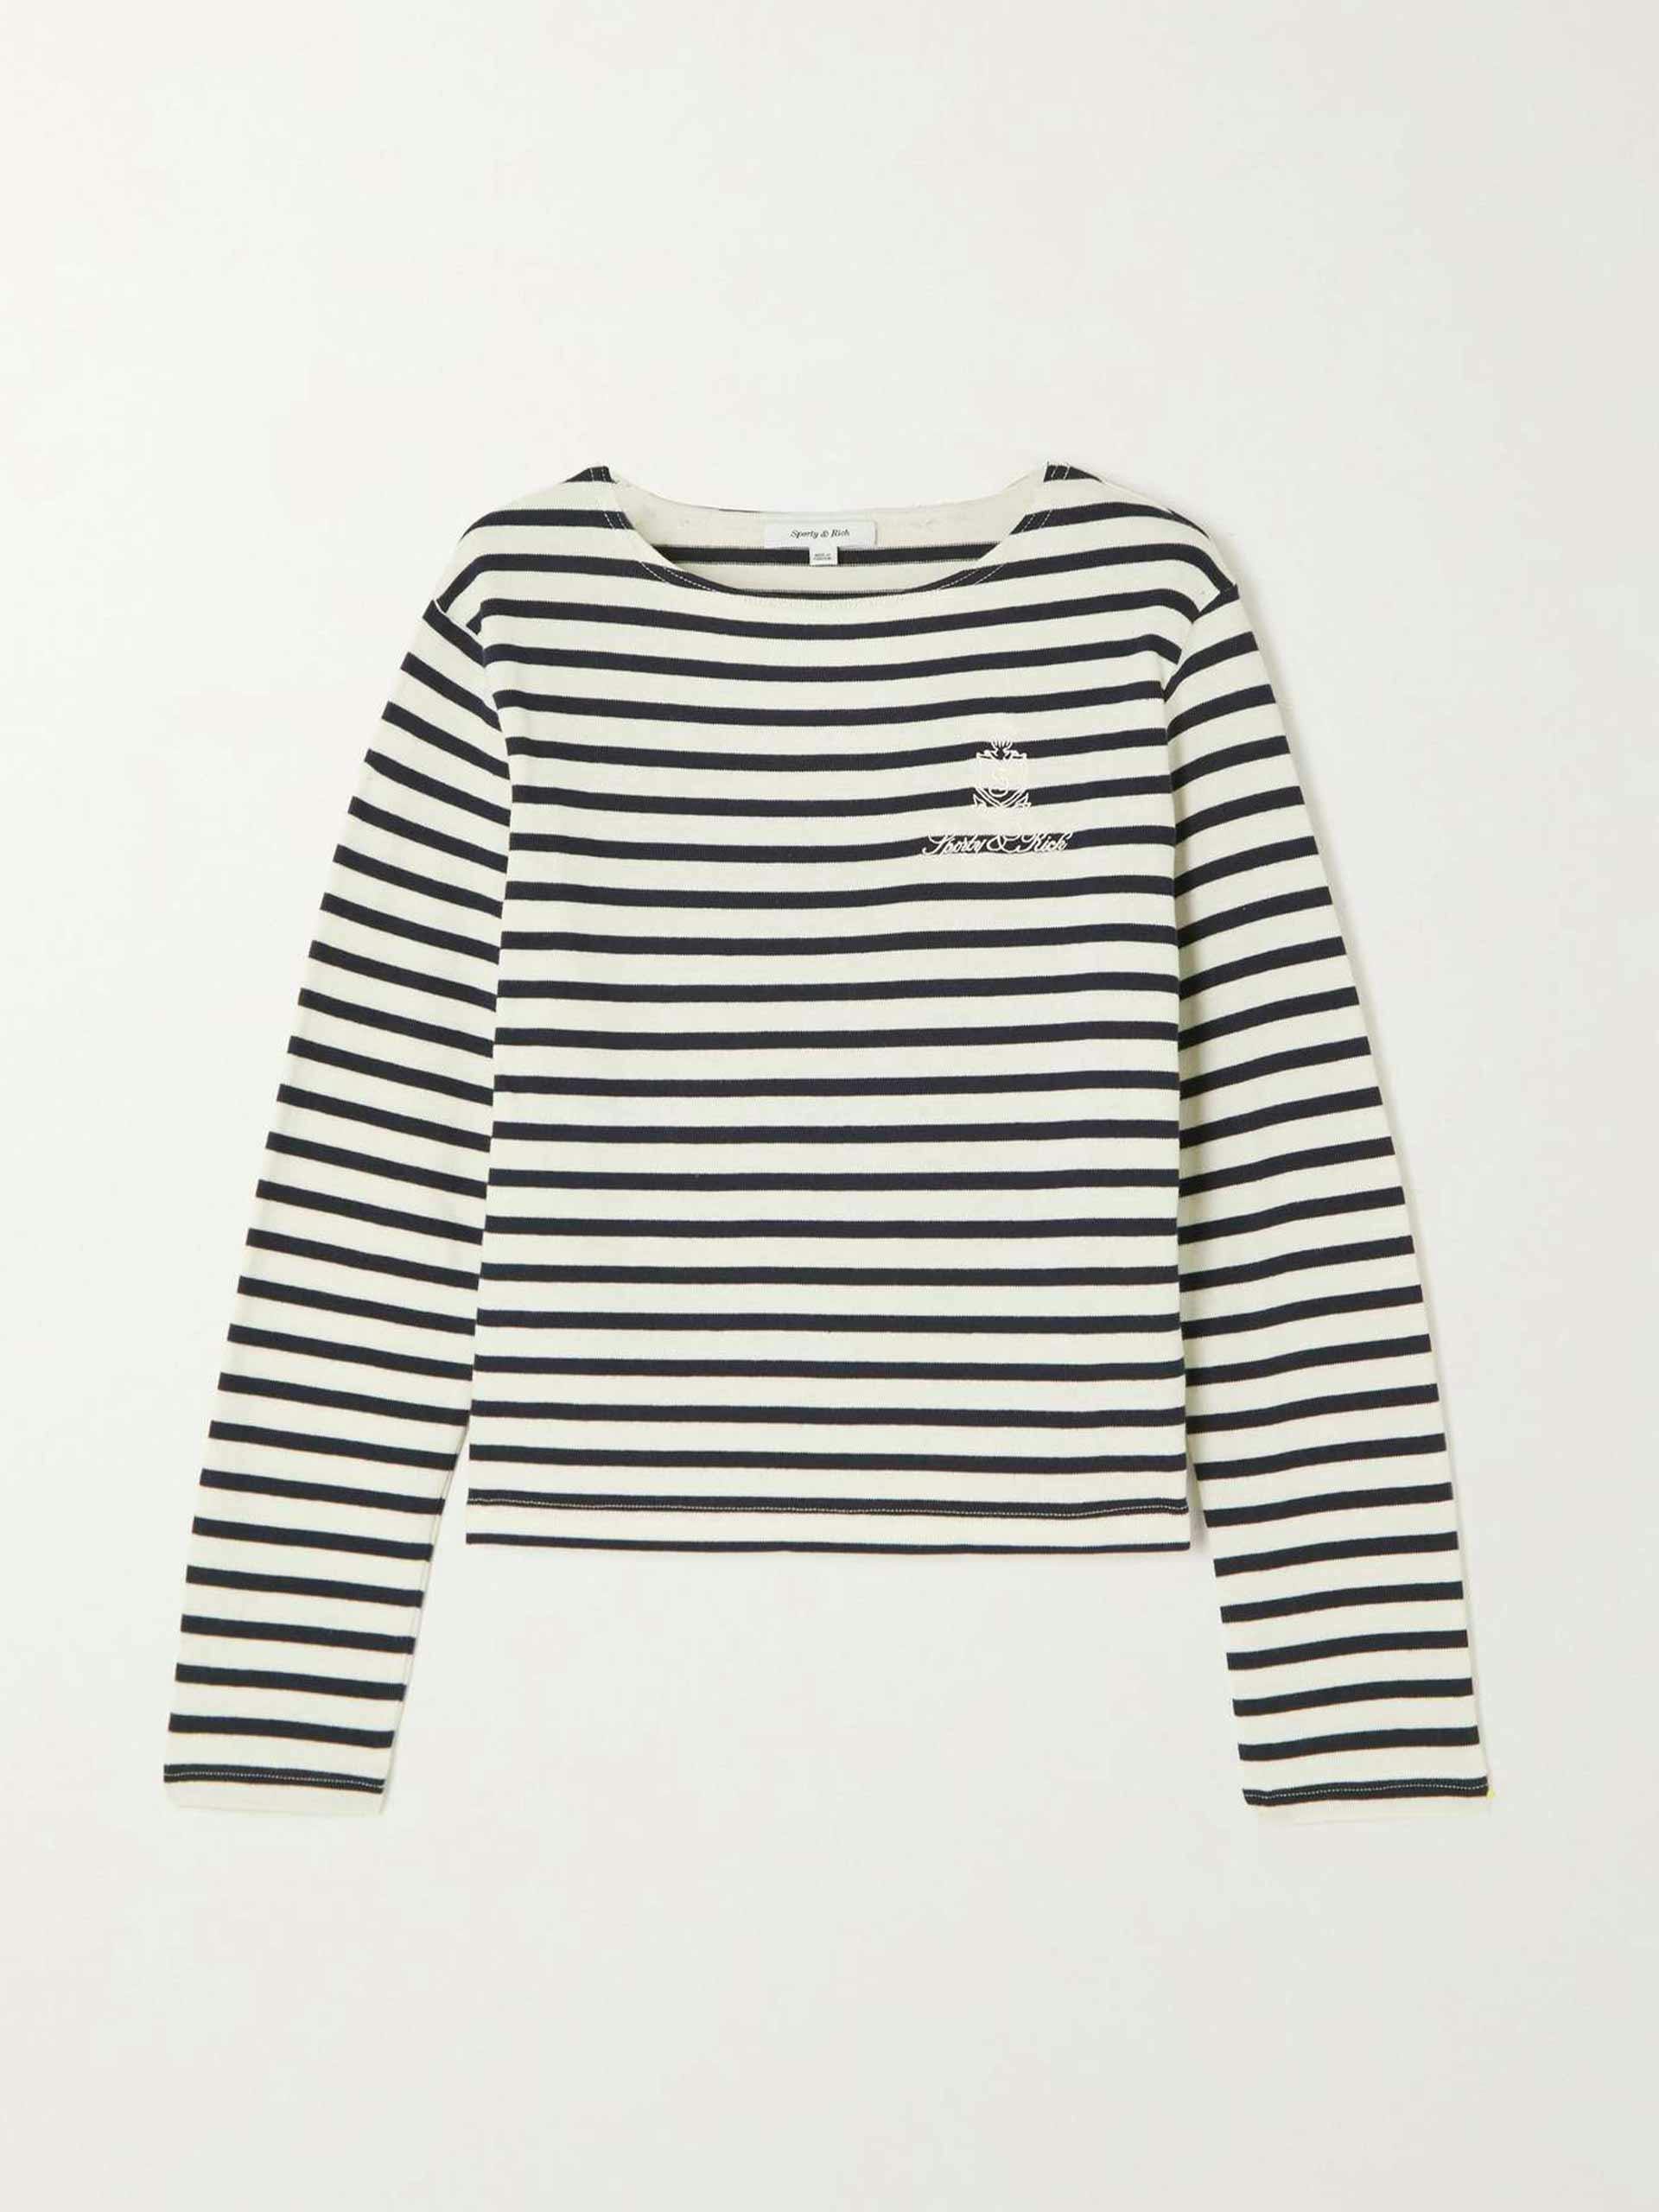 Embroidered striped cotton top